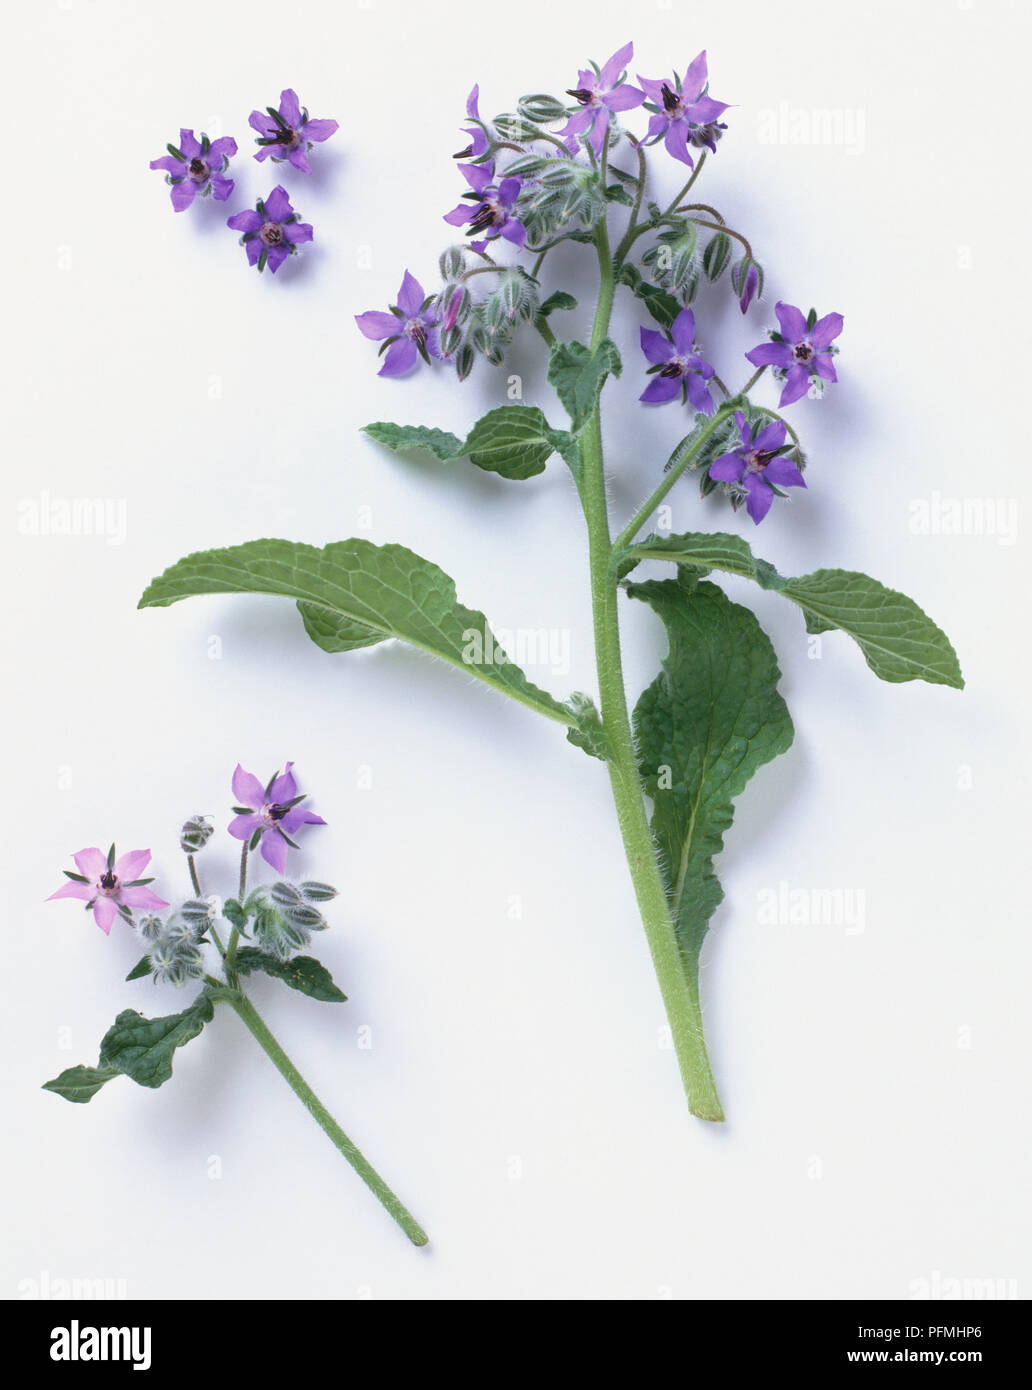 Borago officinalis stem bearing green leaves, cymes of blue flowers and buds Stock Photo